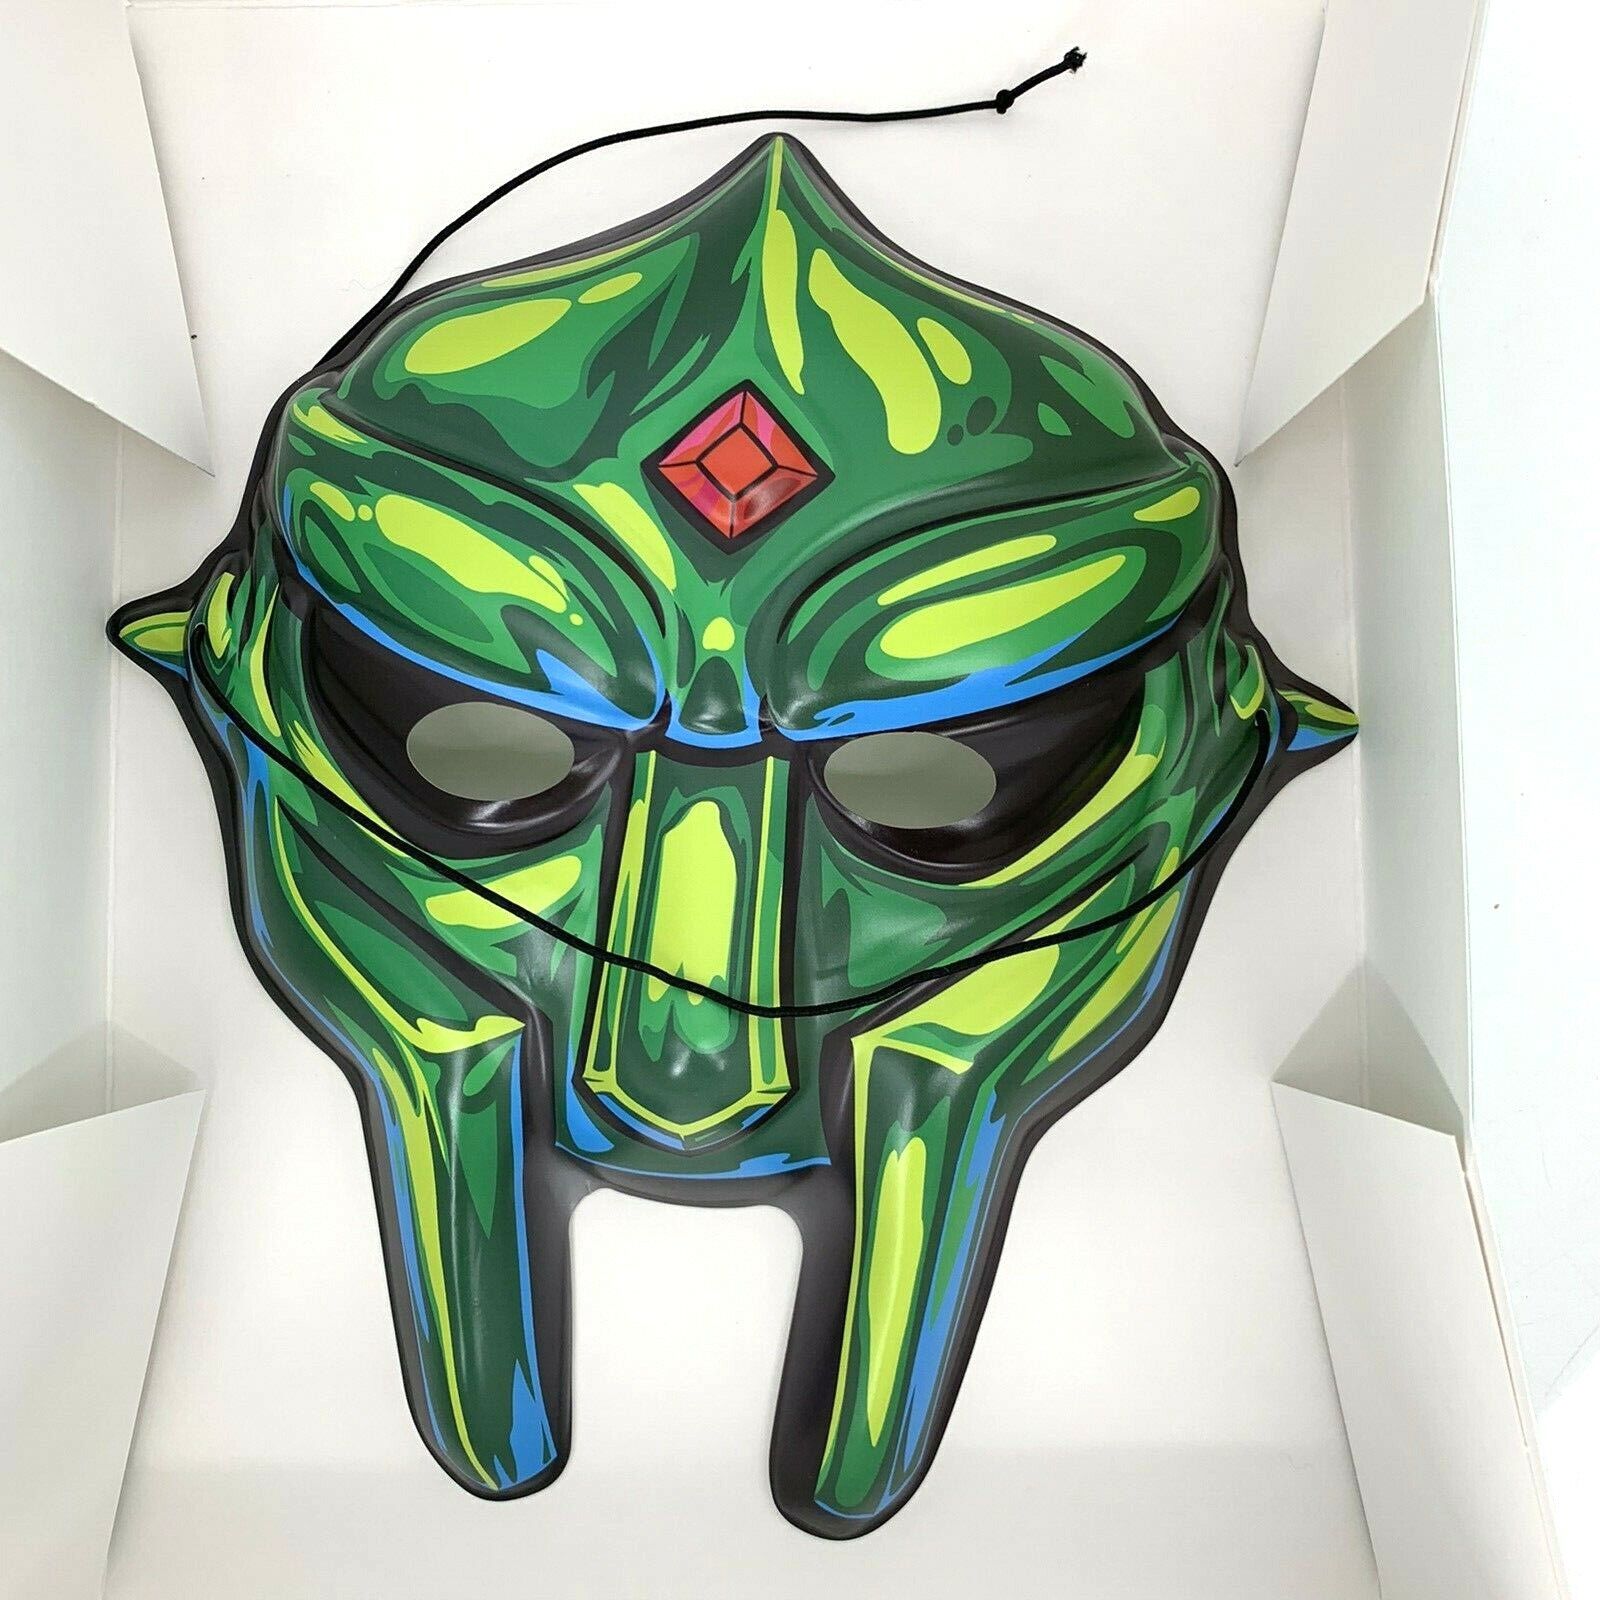 MF DOOM Limited Edition Collectible Mask Complete Set of 4 Sold out Rhymesayers Без бренда - фотография #6